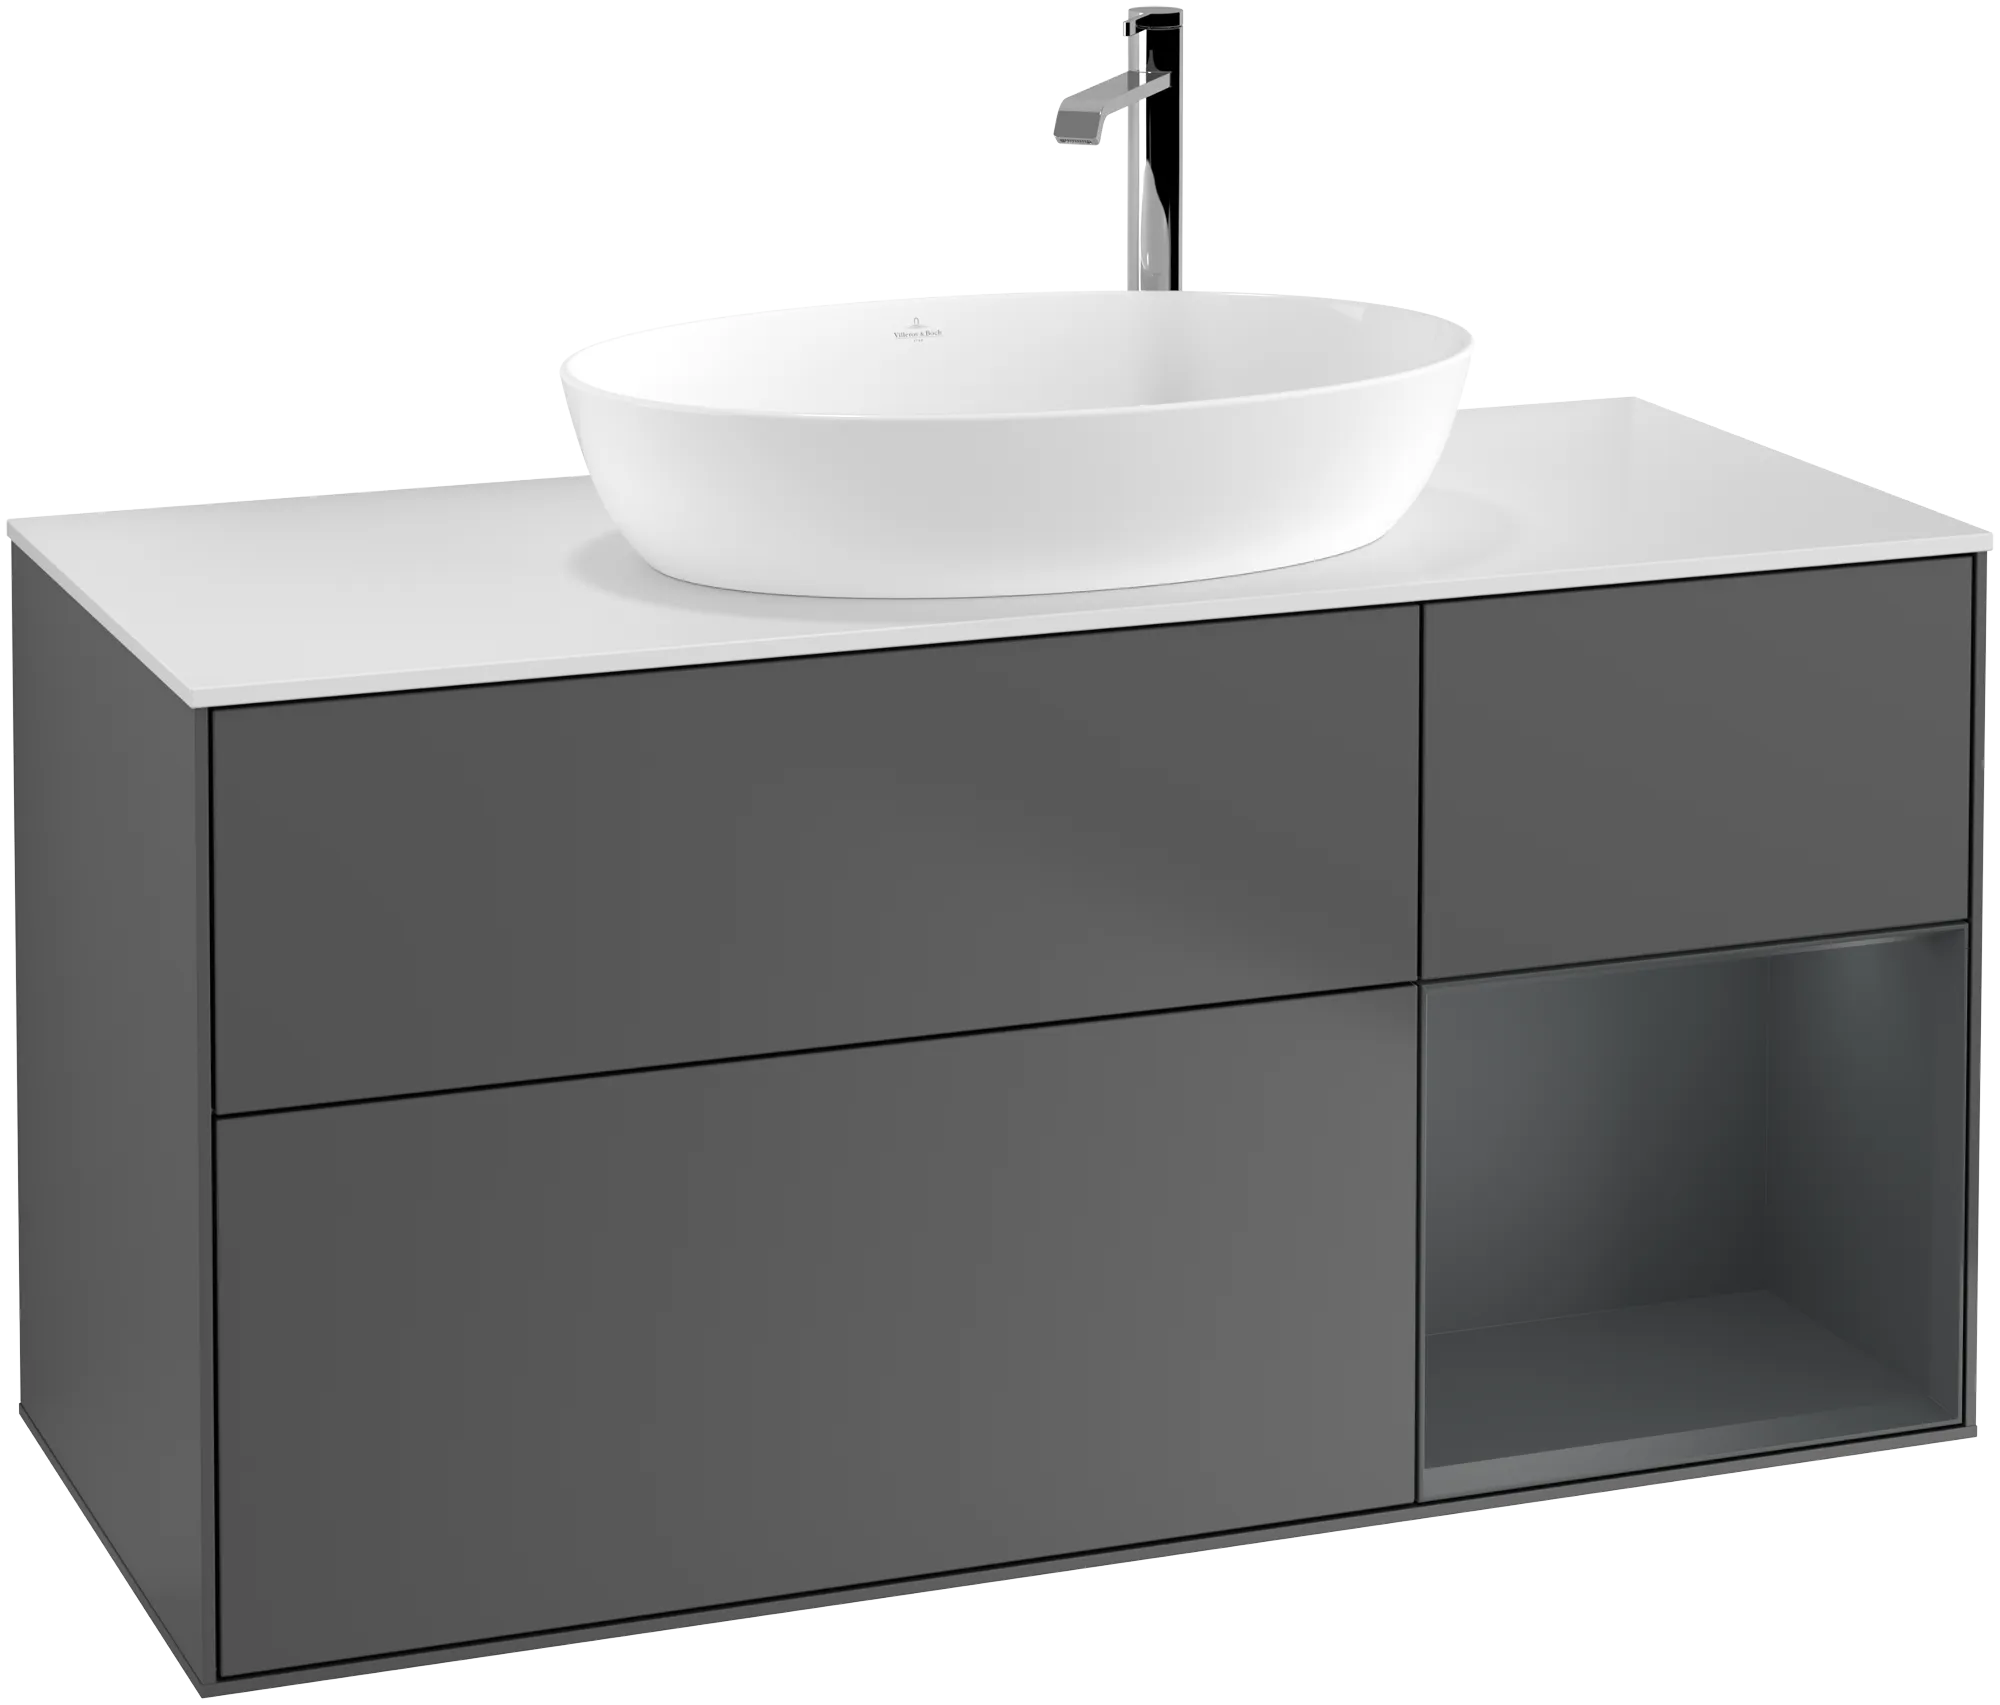 Obrázek VILLEROY BOCH Finion Vanity unit, with lighting, 3 pull-out compartments, 1200 x 603 x 501 mm, Anthracite Matt Lacquer / Midnight Blue Matt Lacquer / Glass White Matt #G951HGGK